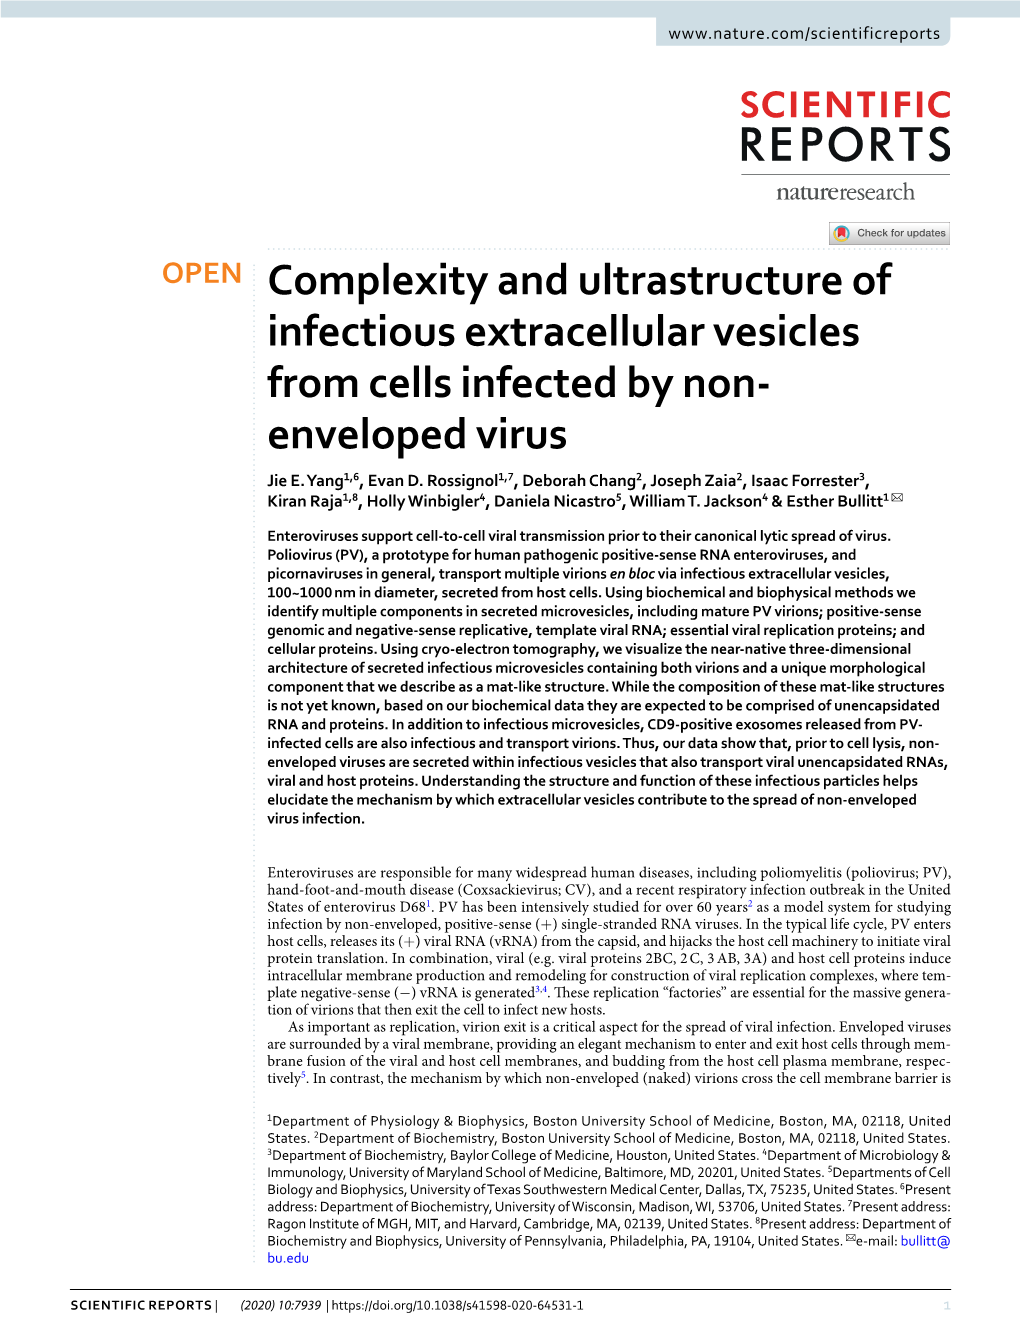 Complexity and Ultrastructure of Infectious Extracellular Vesicles from Cells Infected by Non- Enveloped Virus Jie E